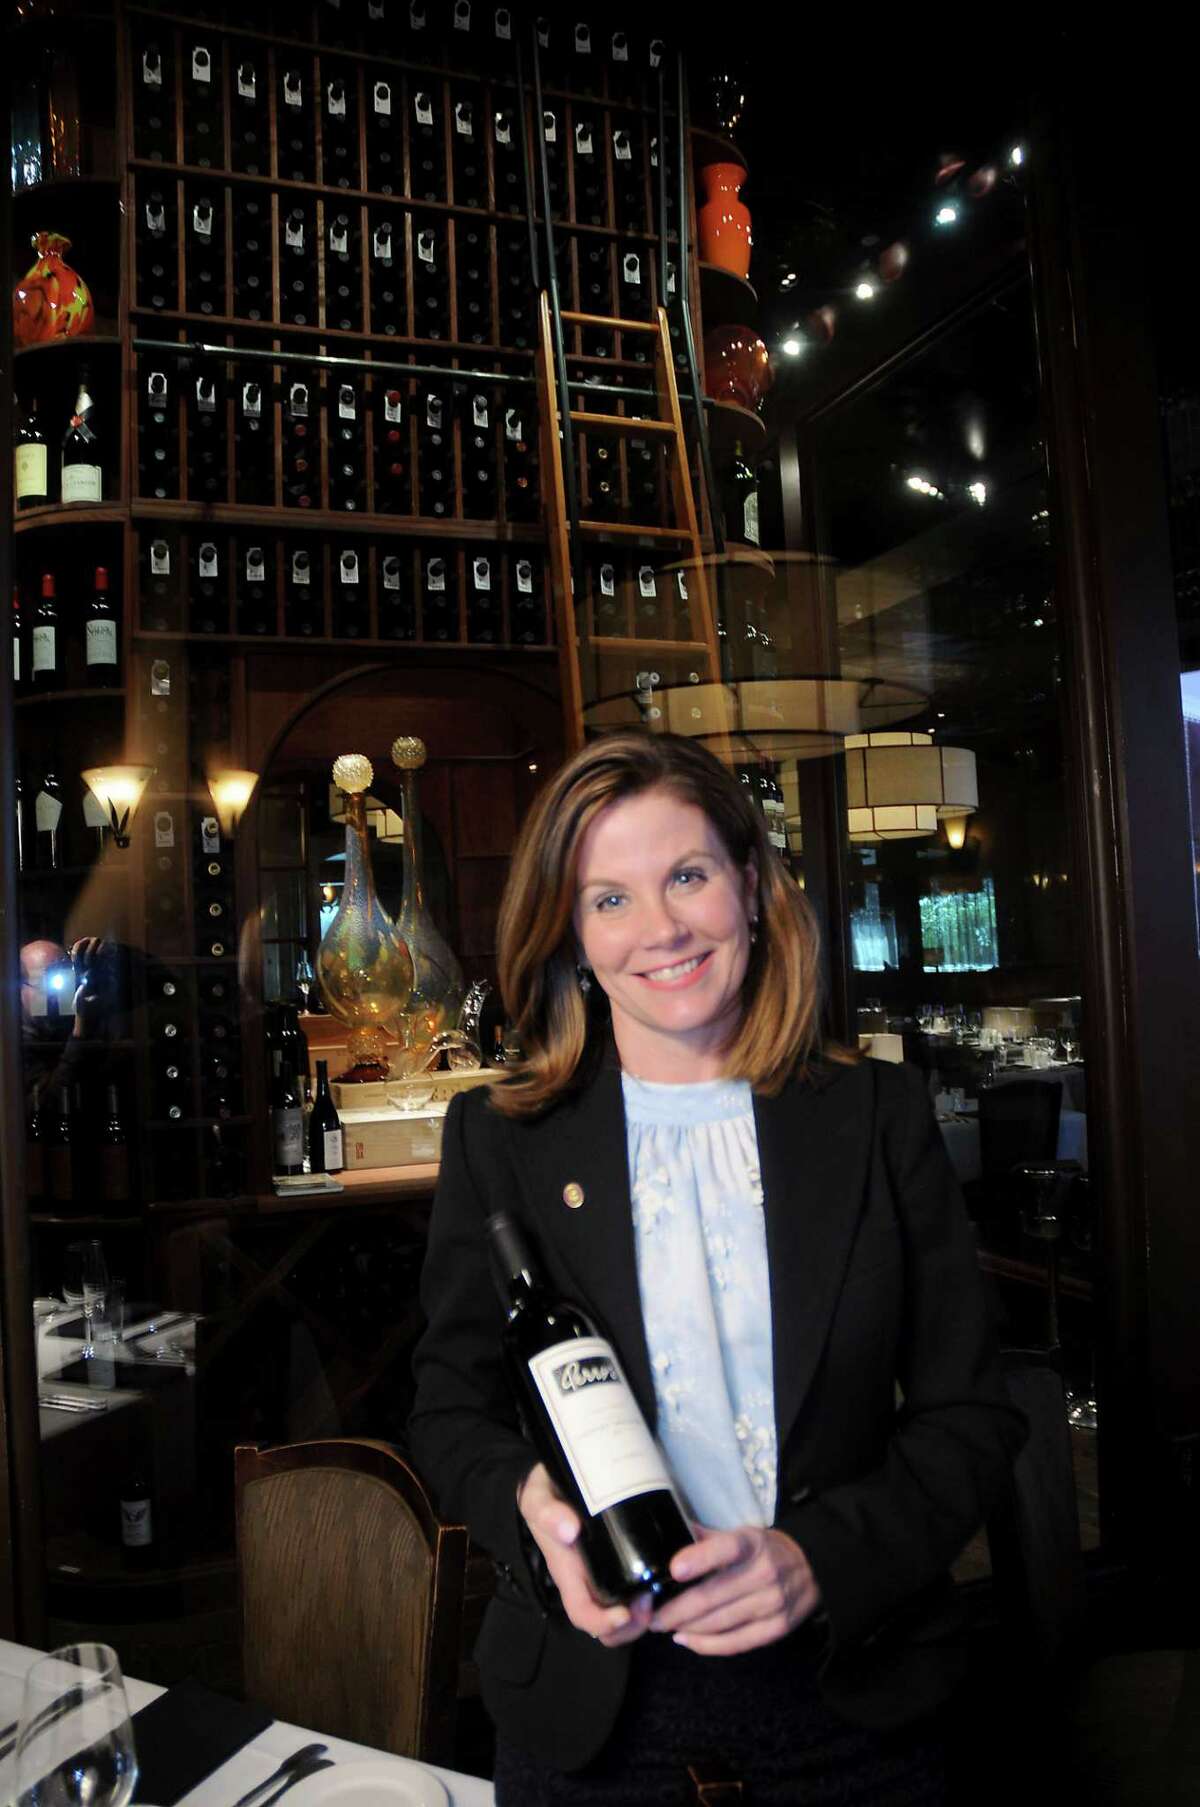 Susi Zivanovic with a bottle of Perry's Sonoma County Cabernet Sauvignon 2013 Reserve at Perry's Steakhouse Memorial City Wednesday Feb. 15, 2017.(Dave Rossman photo)